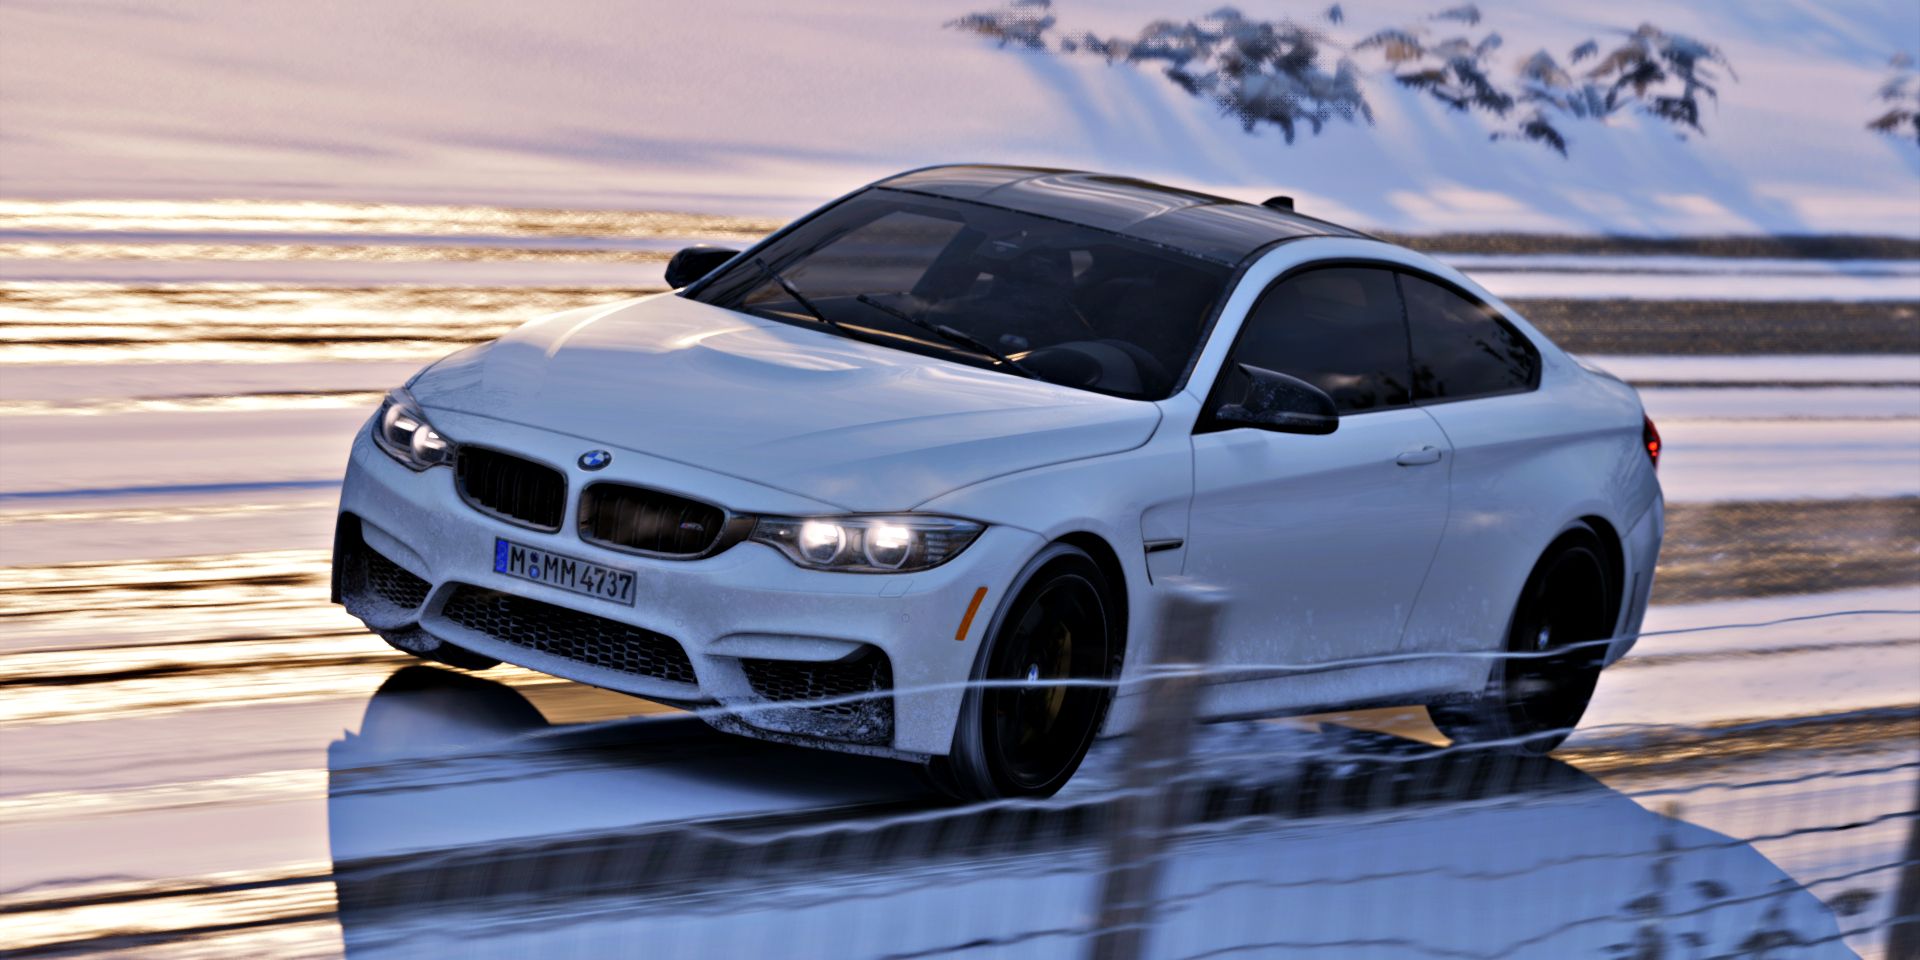 The BMW M4 Coupe in Forza Horizon